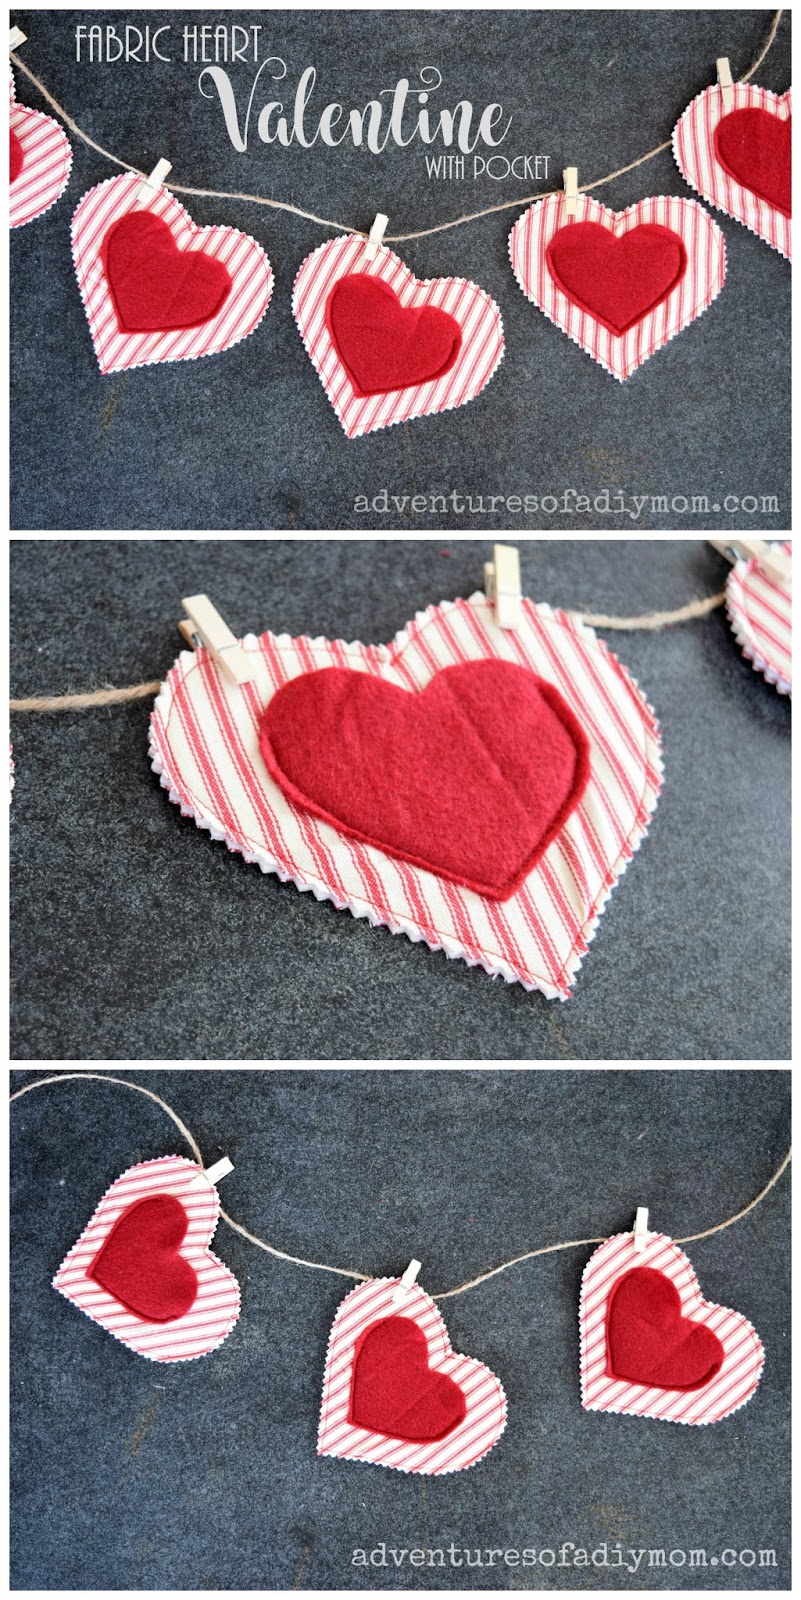 How to Make a Fabric Heart Valentine with a Pocket Adventures of a